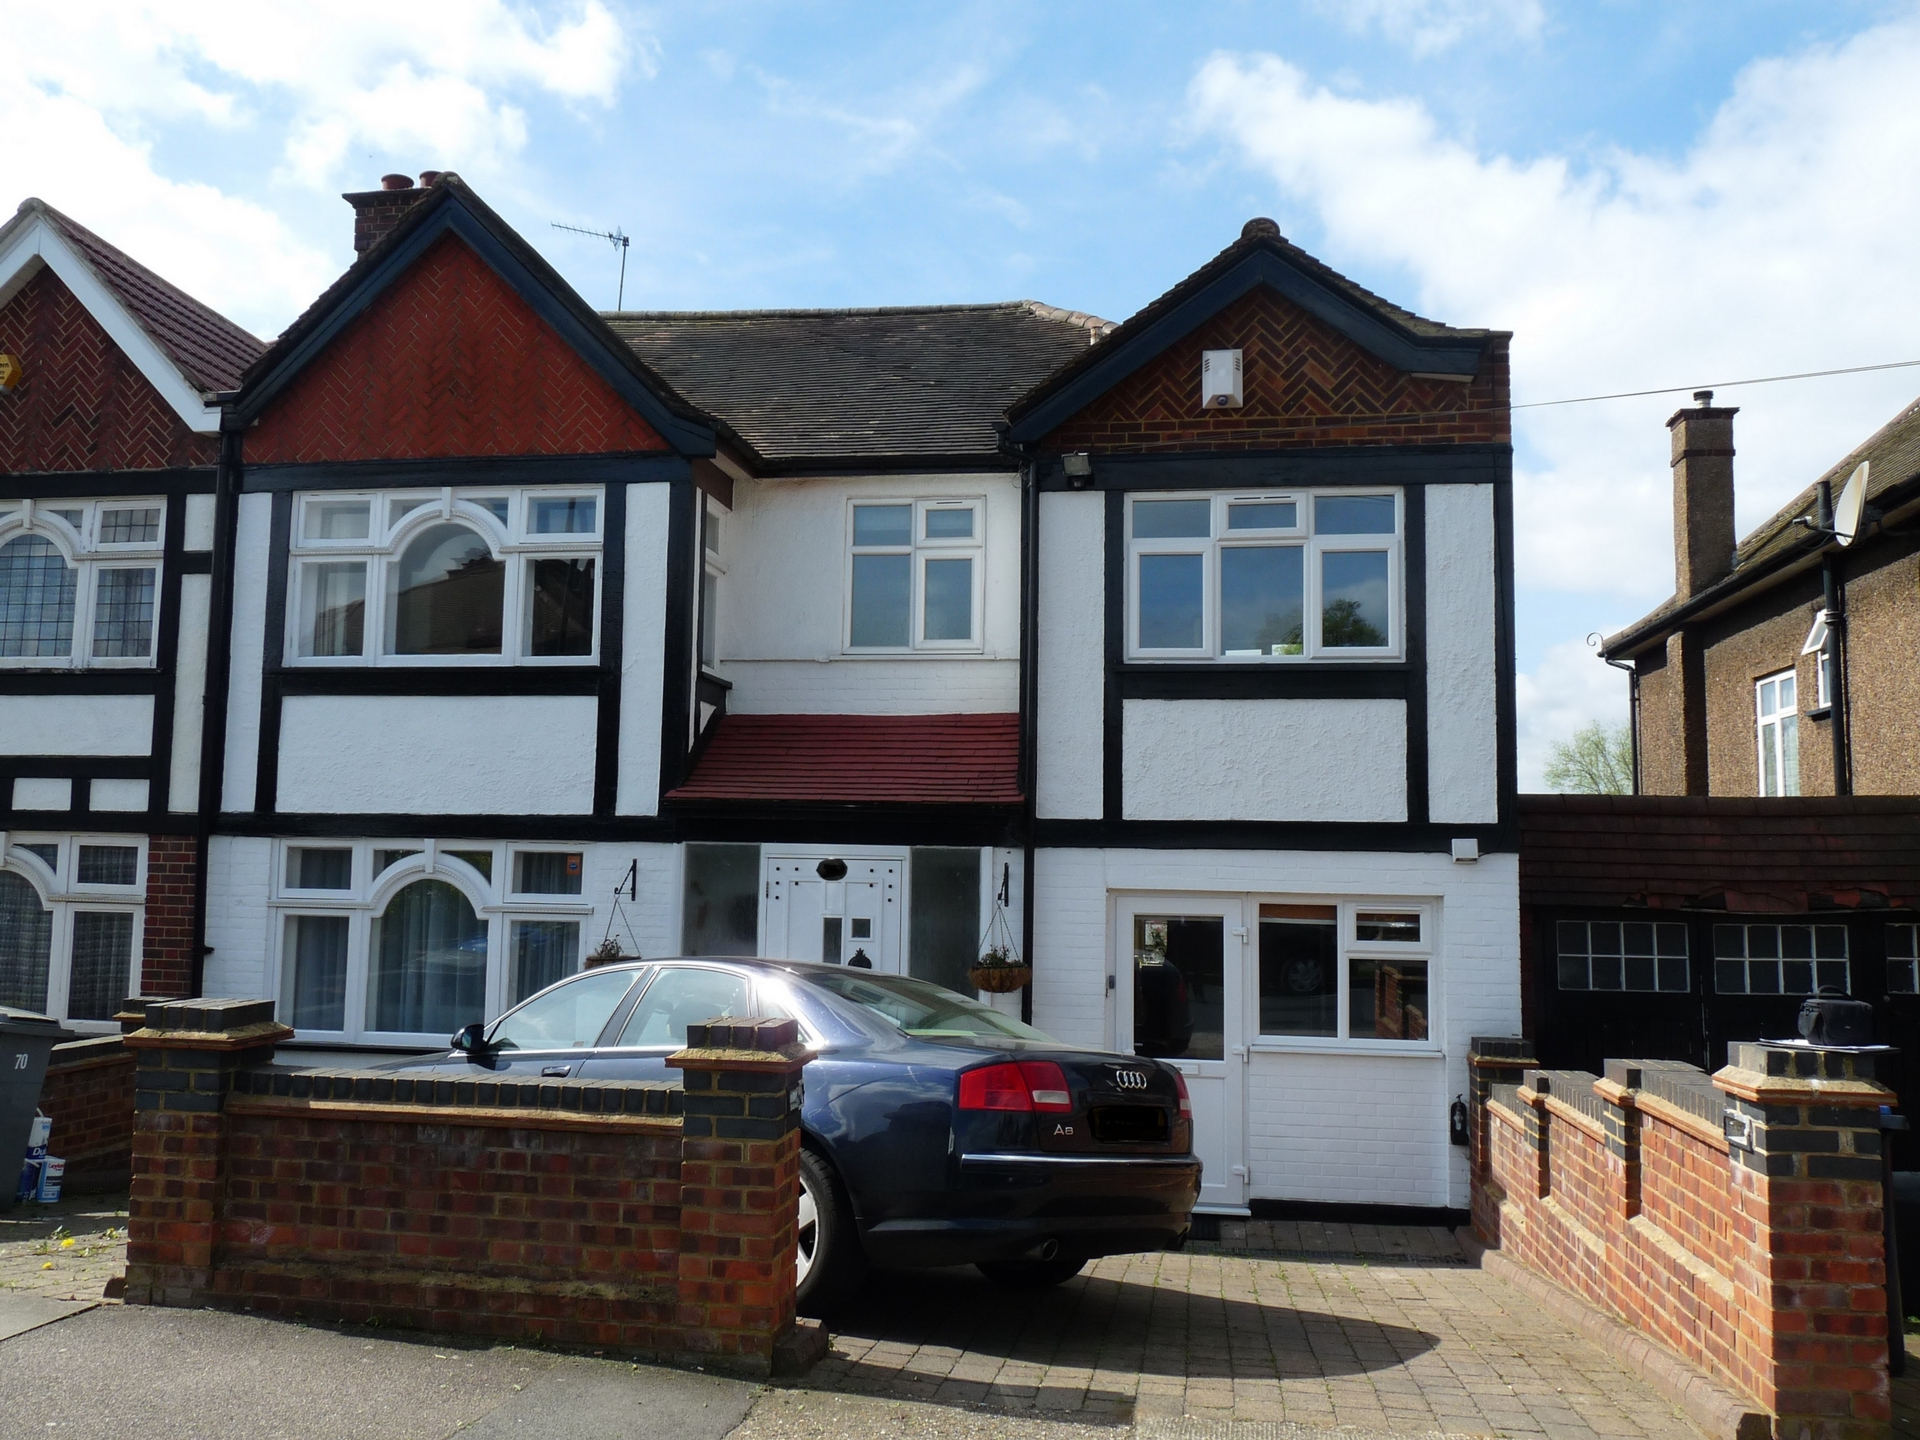 Windermere Avenue Wembley Middlesex HA9